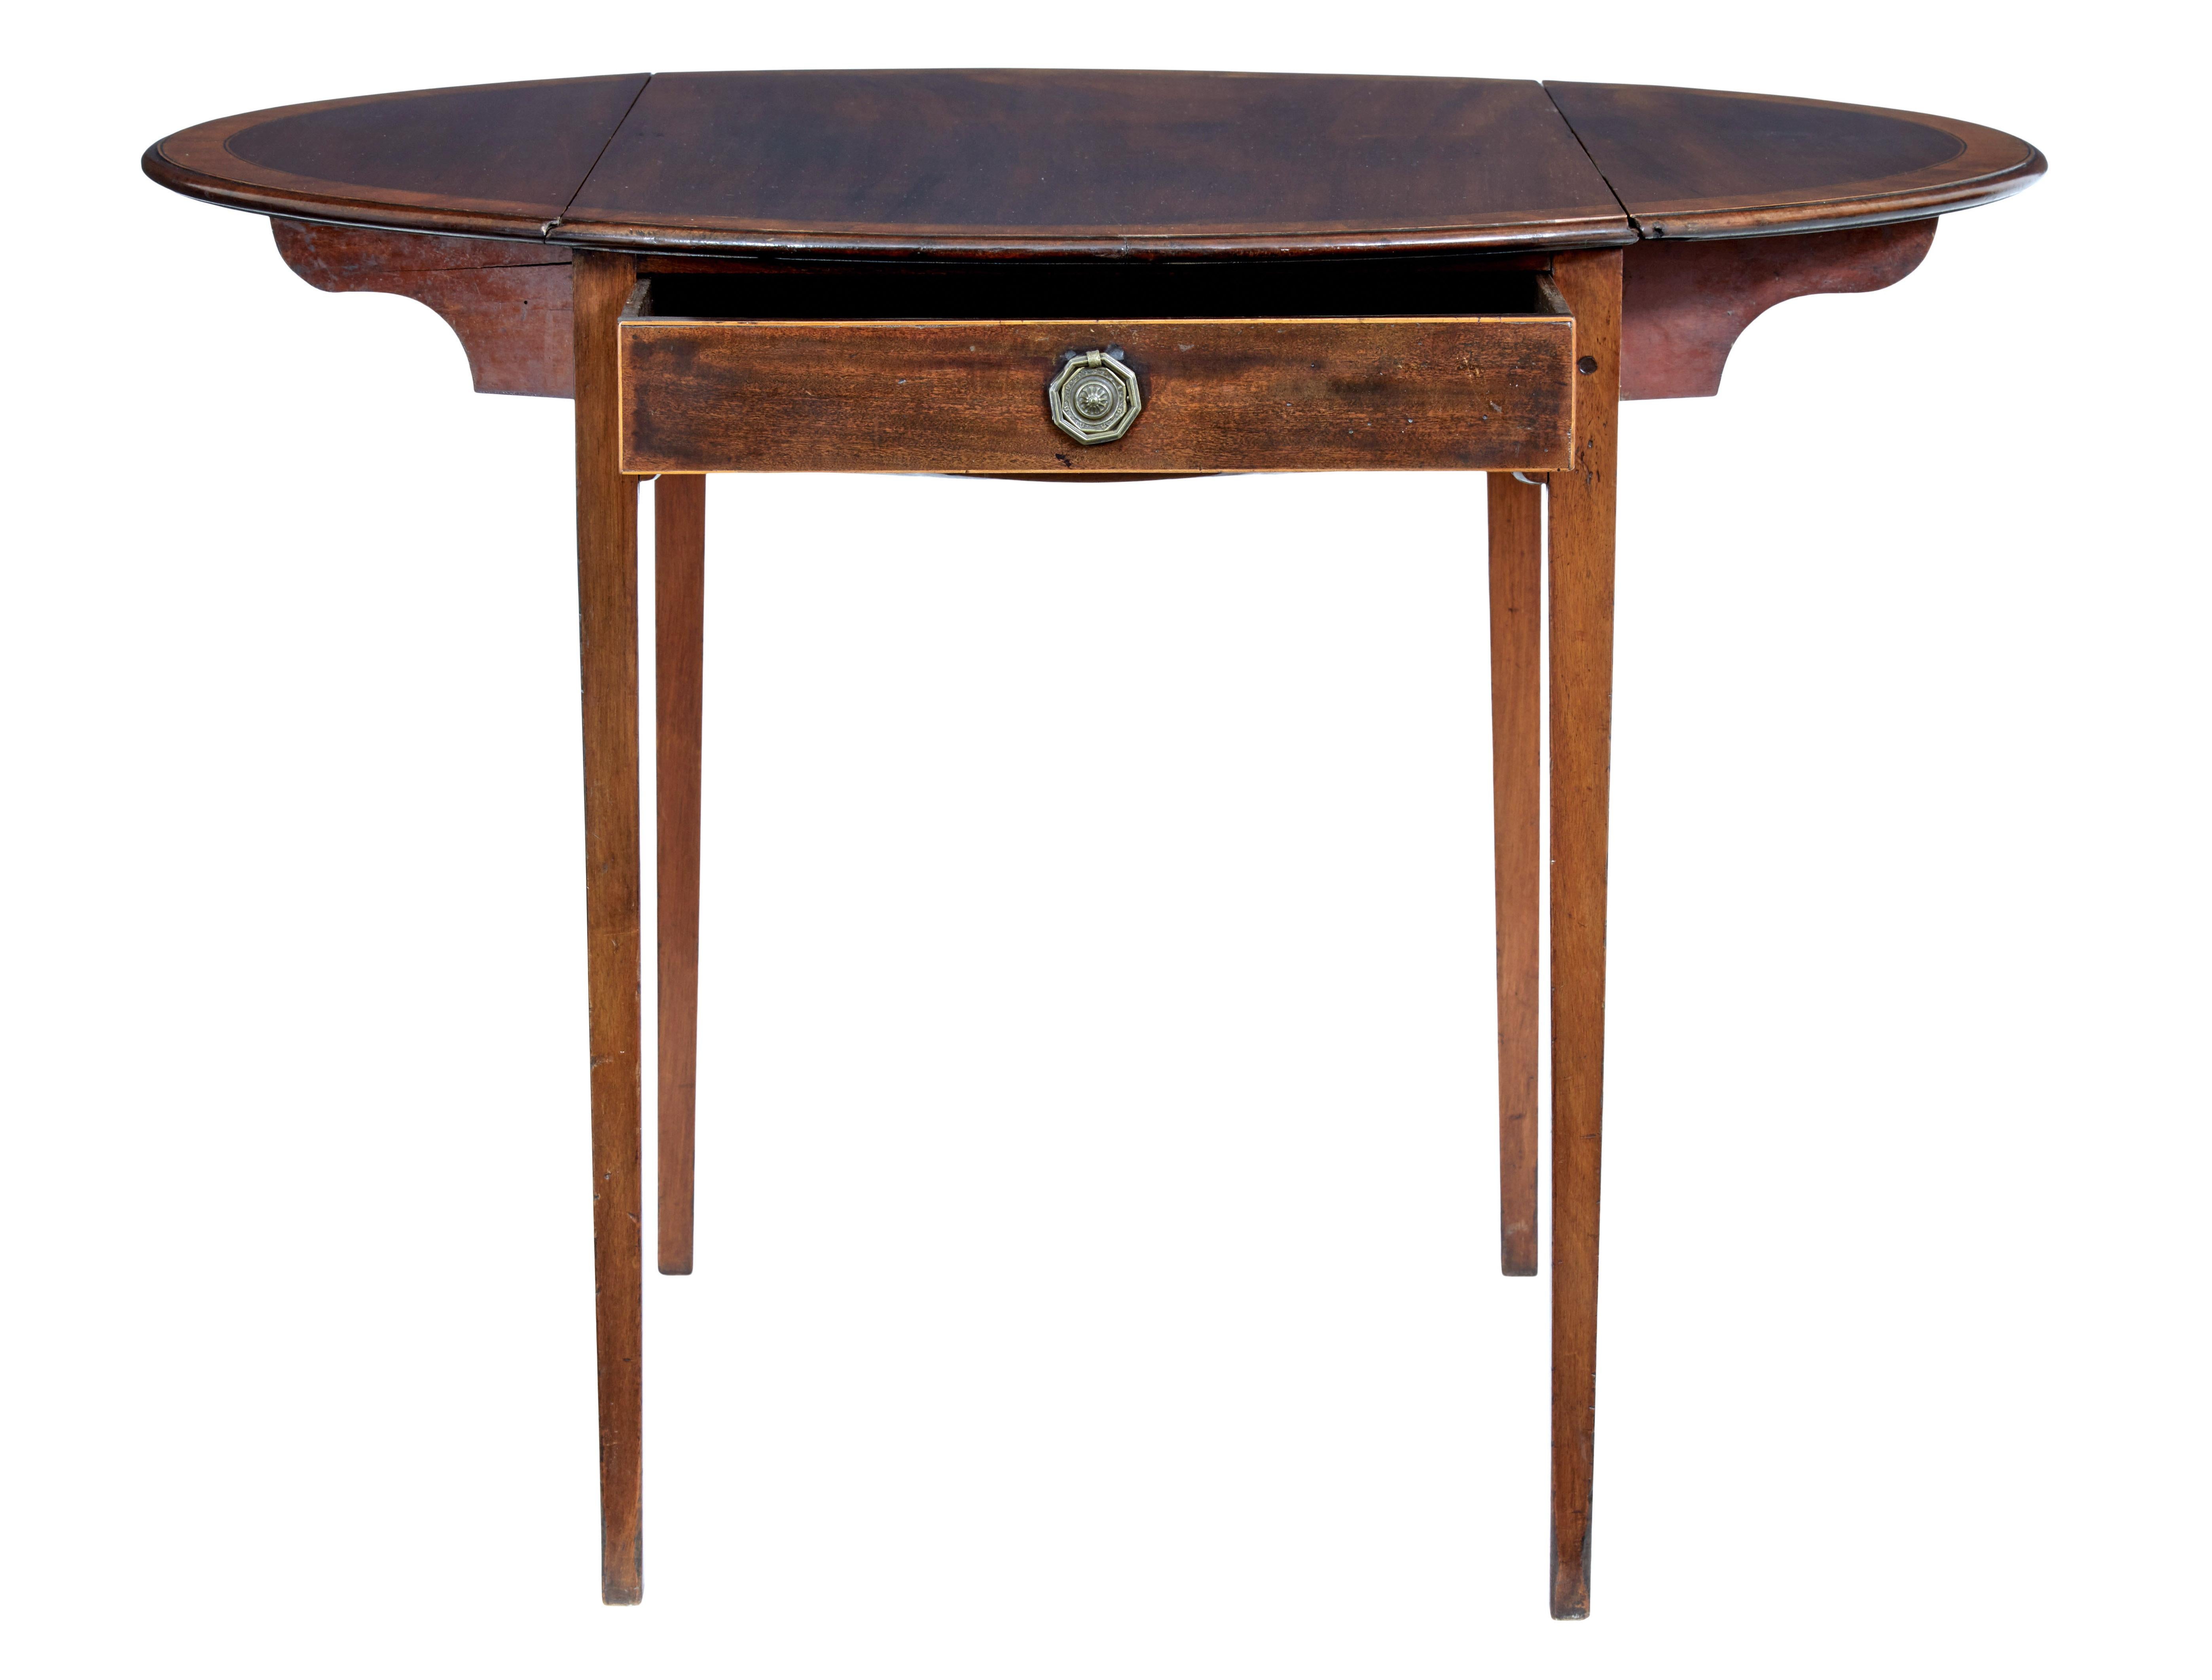 Hand-Crafted 19th Century Late Regency Mahogany Pembroke Table